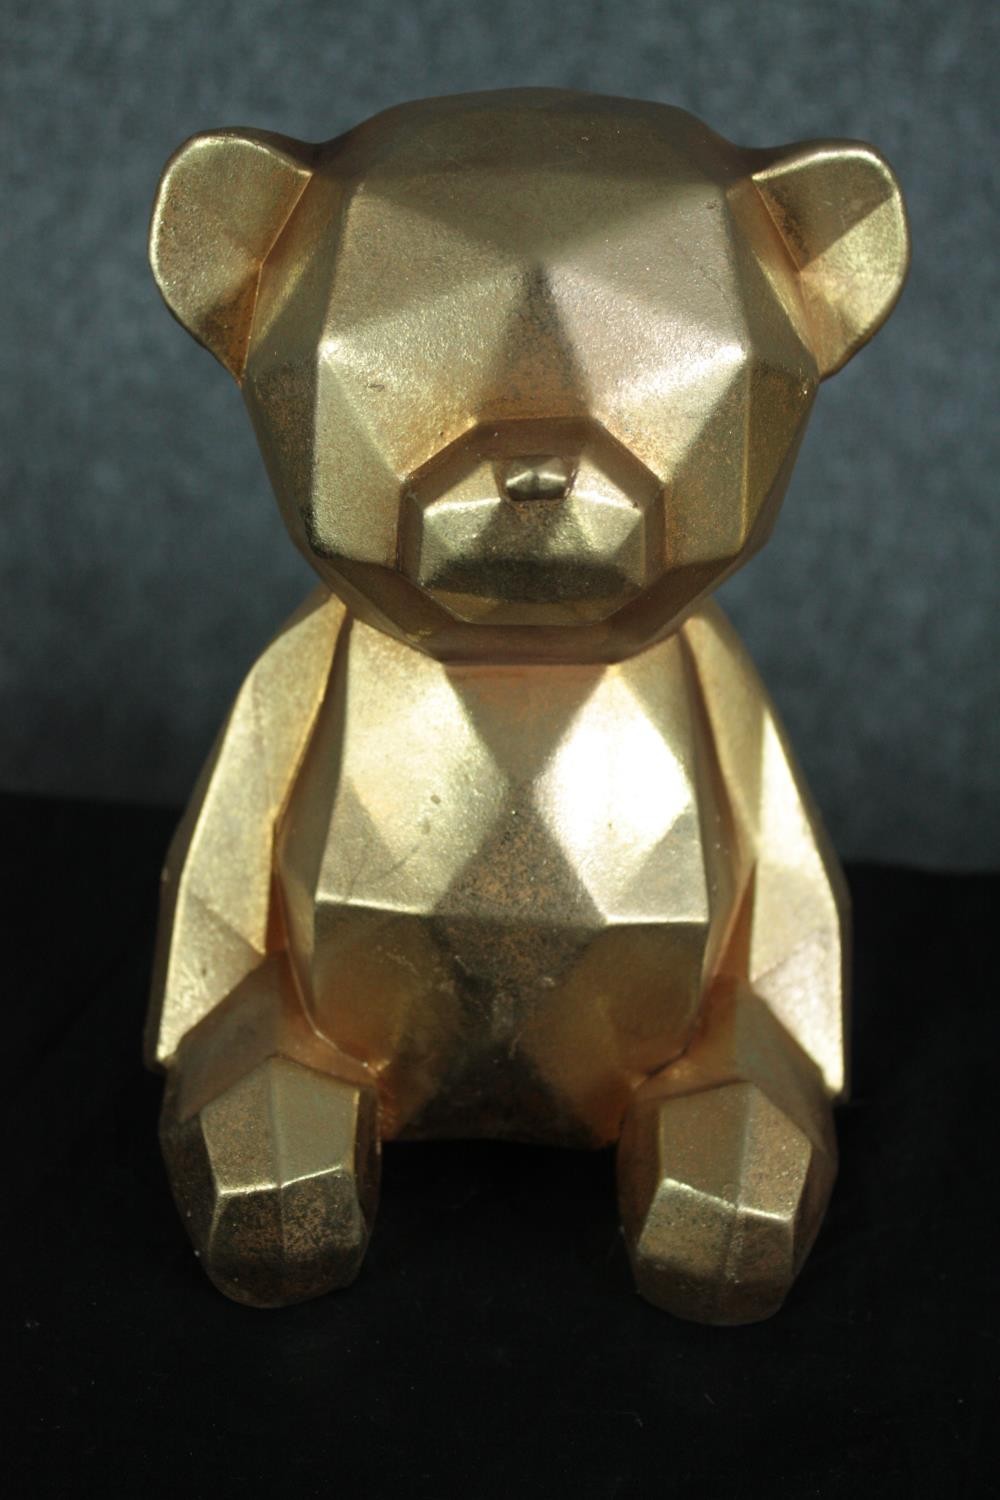 Four decorative teddy bears, gold lacquered. H.20cm. (each) - Image 2 of 5